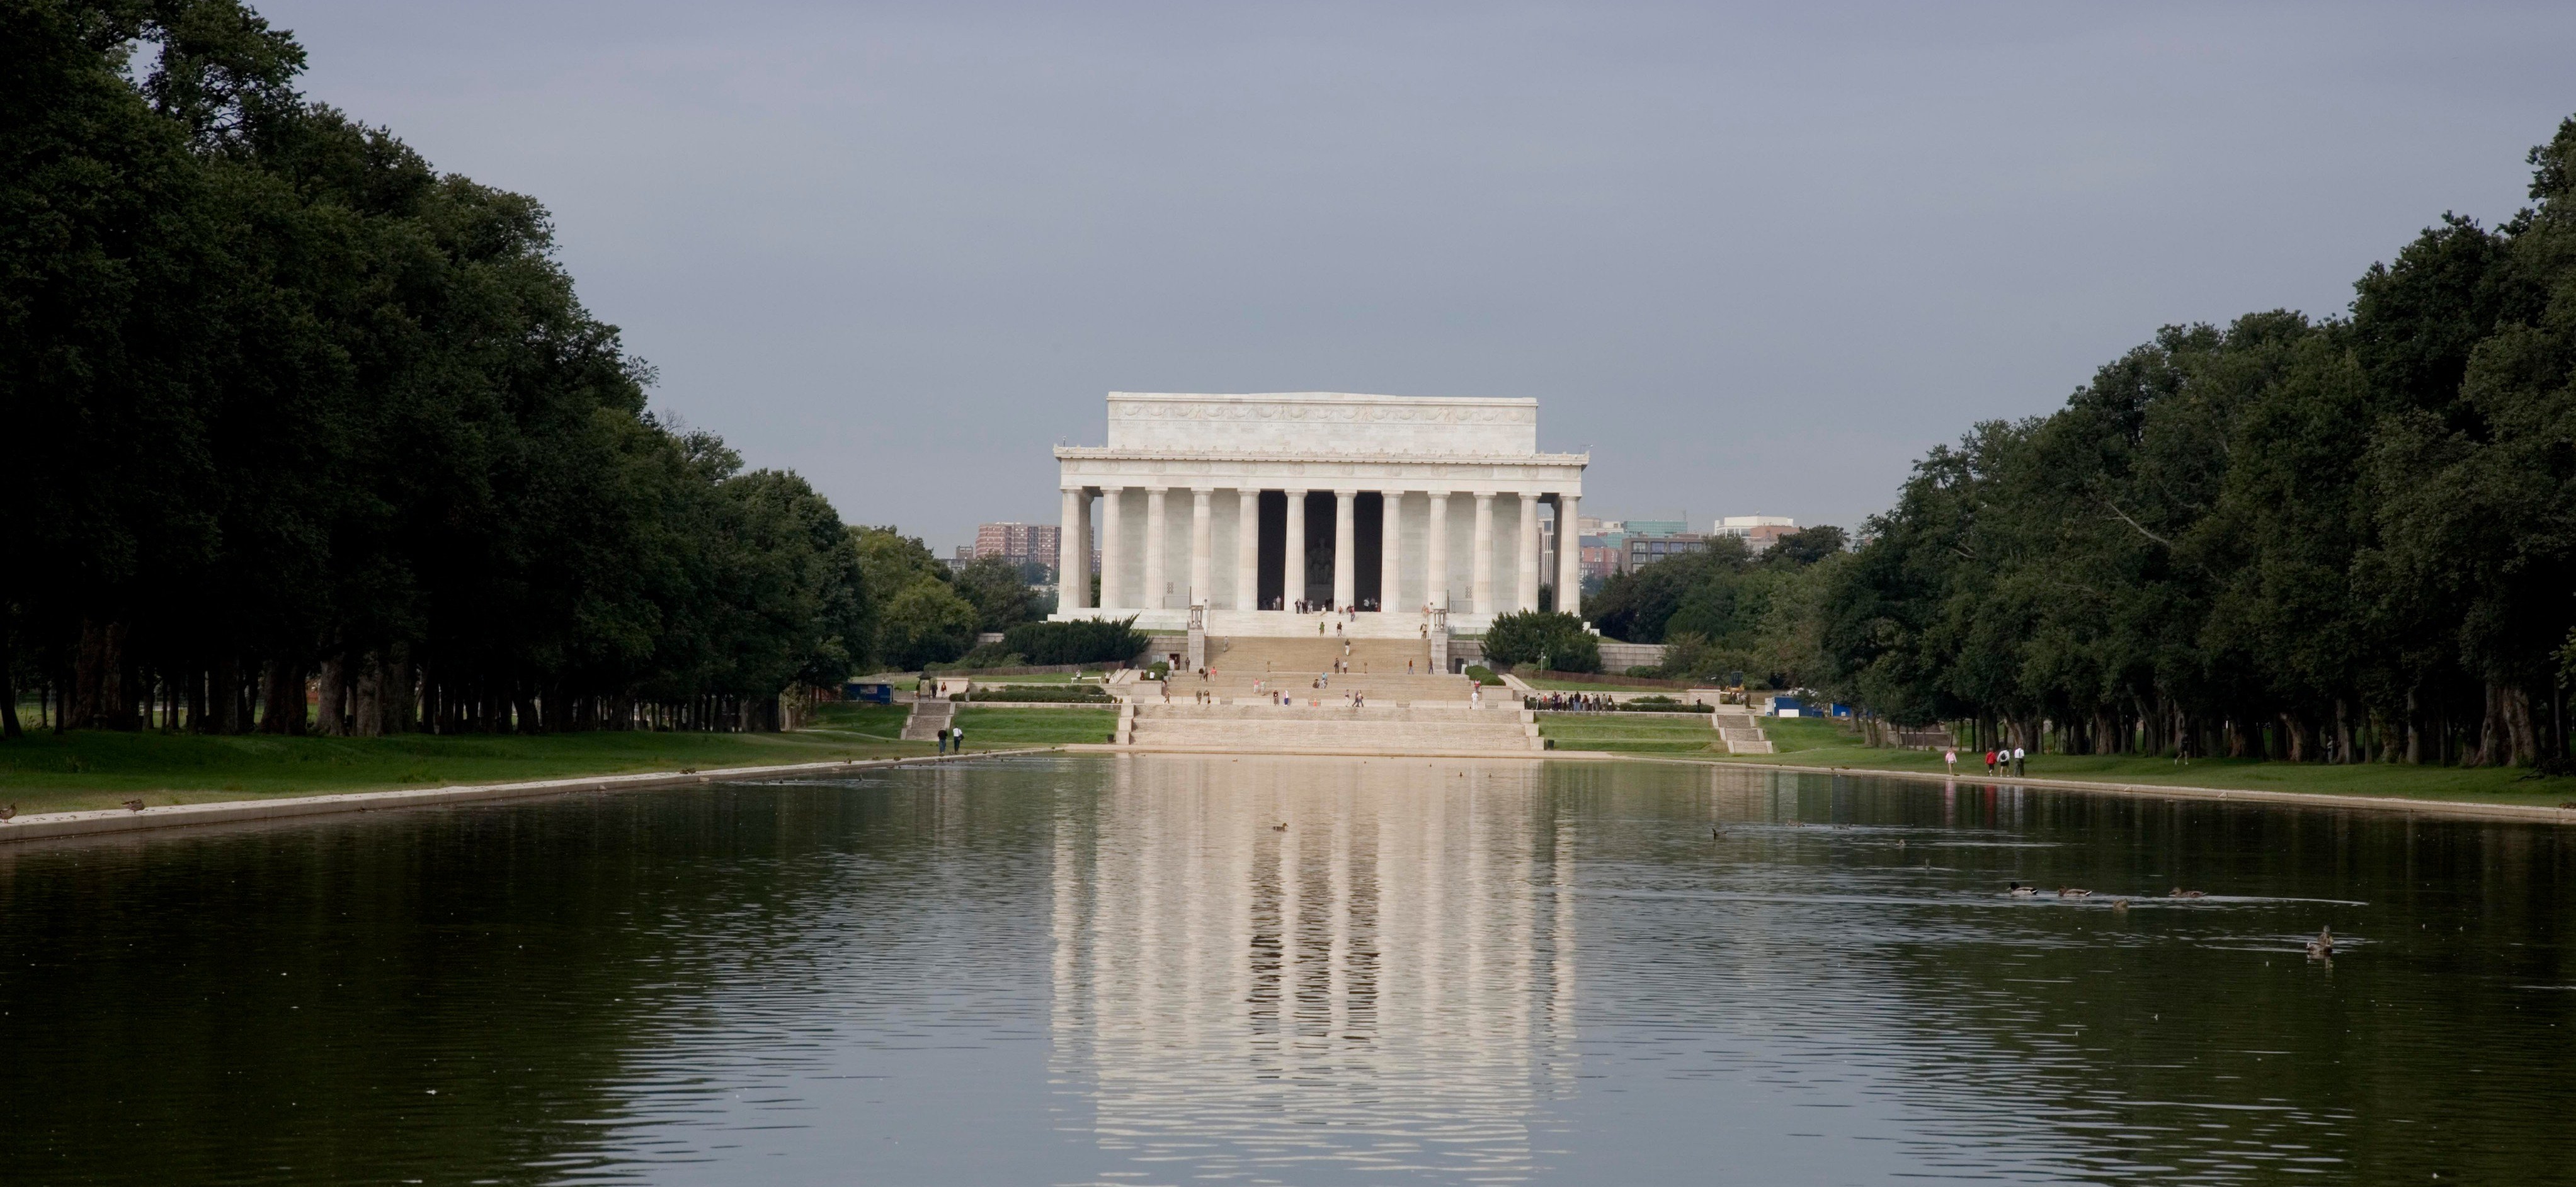 Know Your Monuments: D.C. Presidents Edition (U.S. National Park Service)